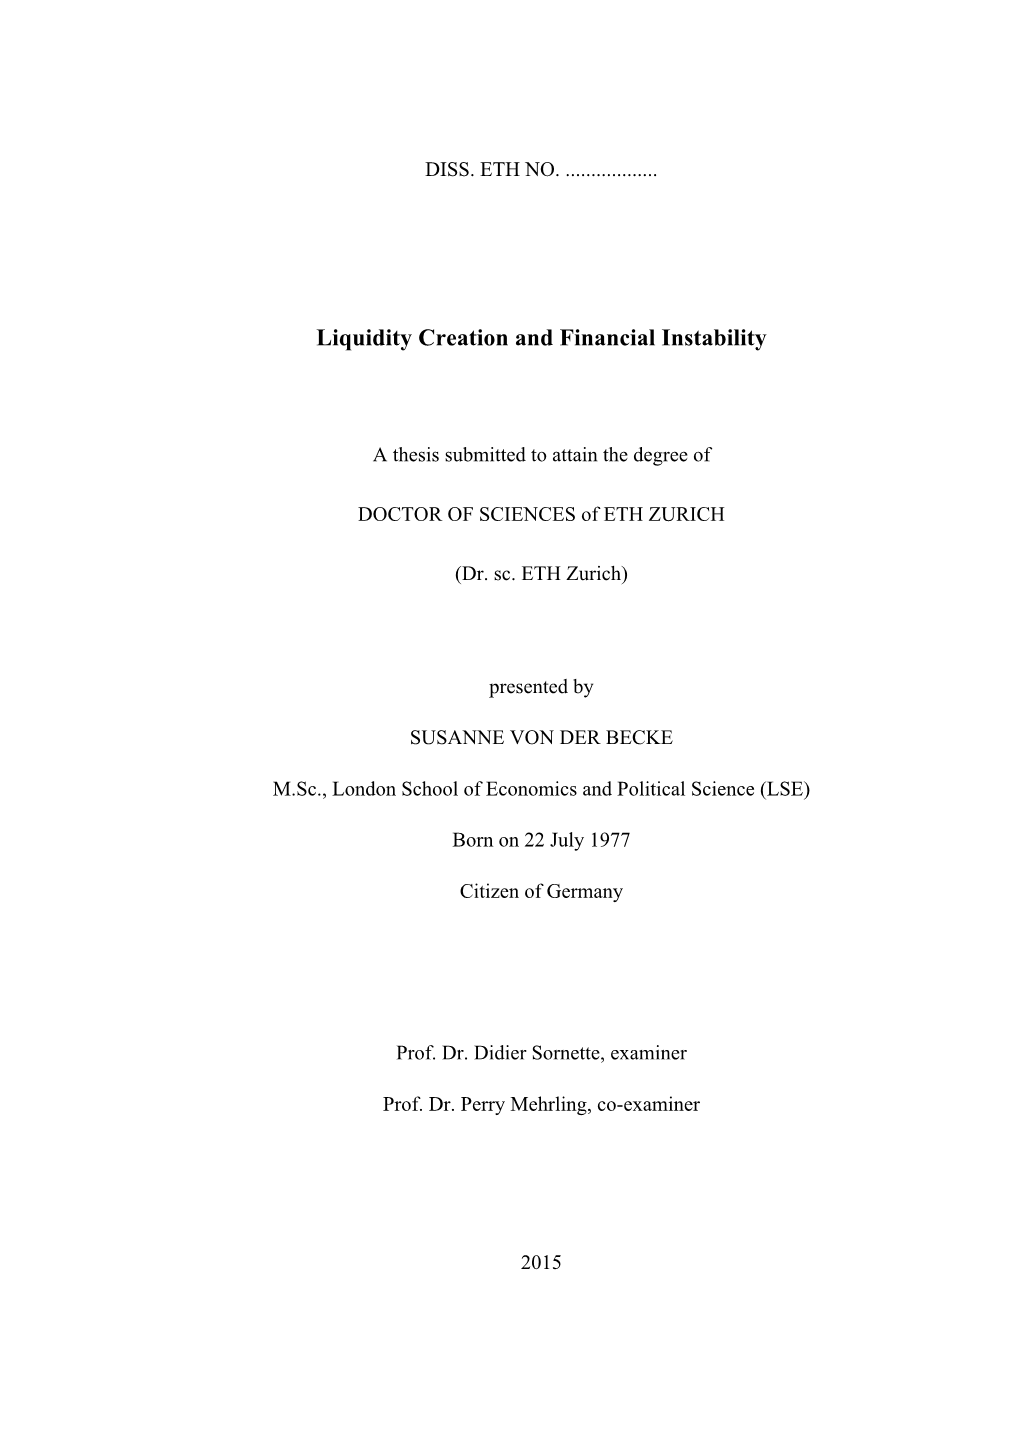 Liquidity Creation and Financial Instability